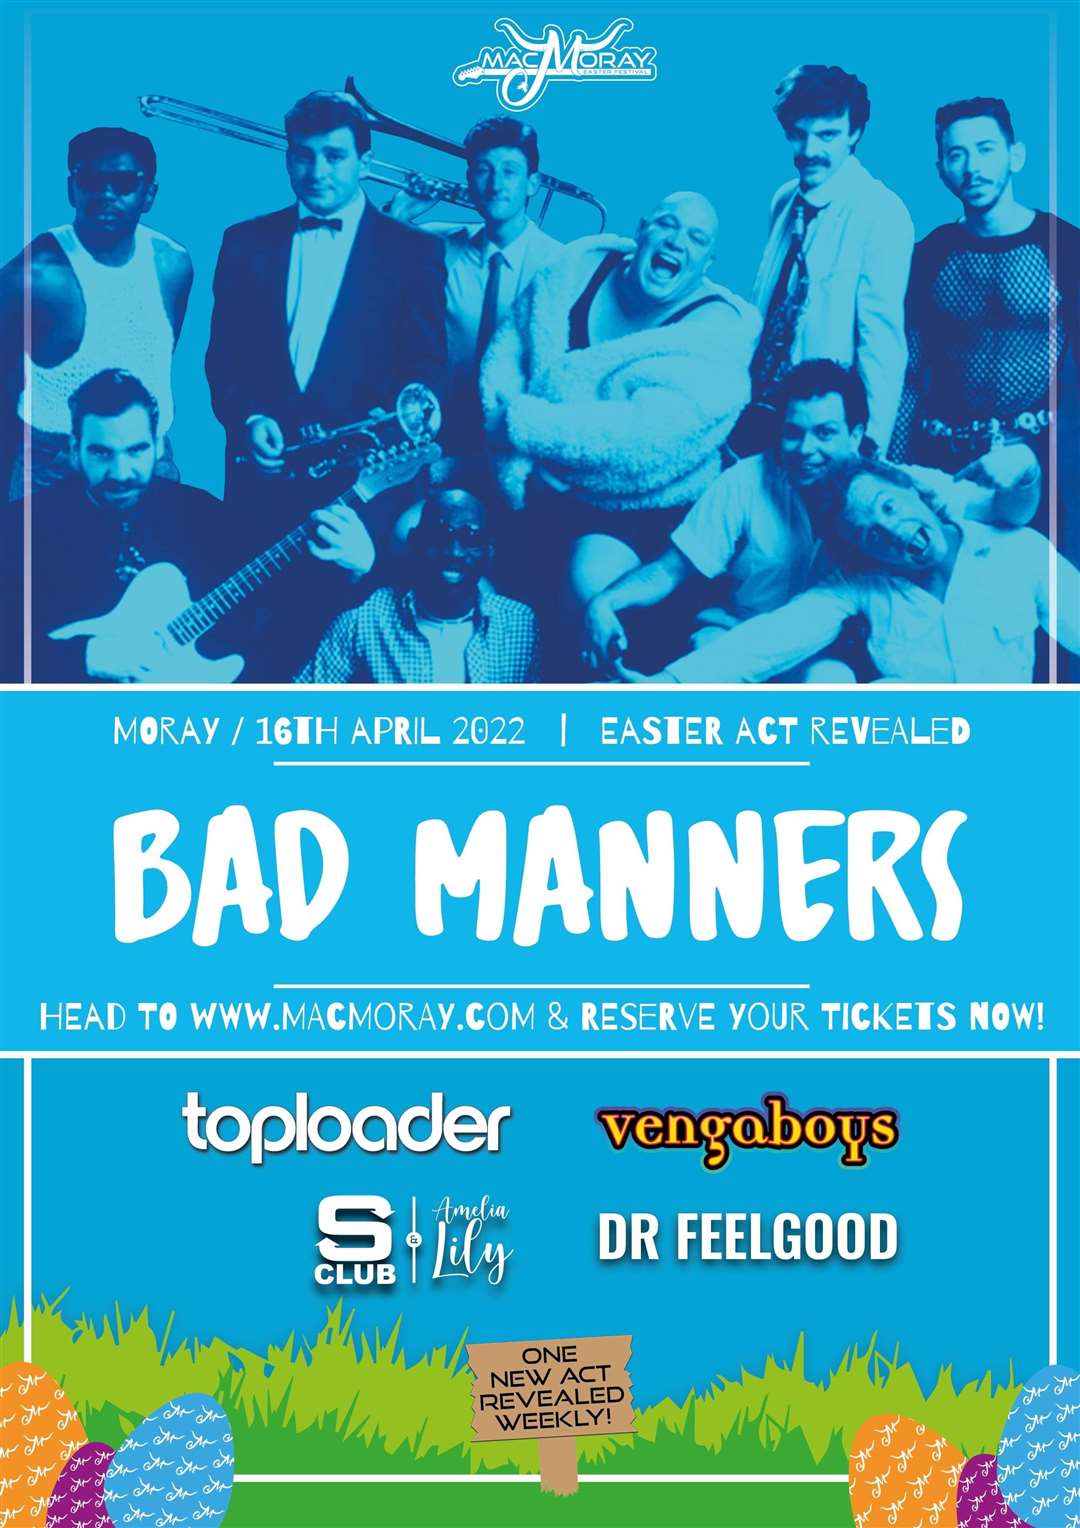 70s ska band Bad Manners have been added to the MacMoray Family Easter Festival line-up.